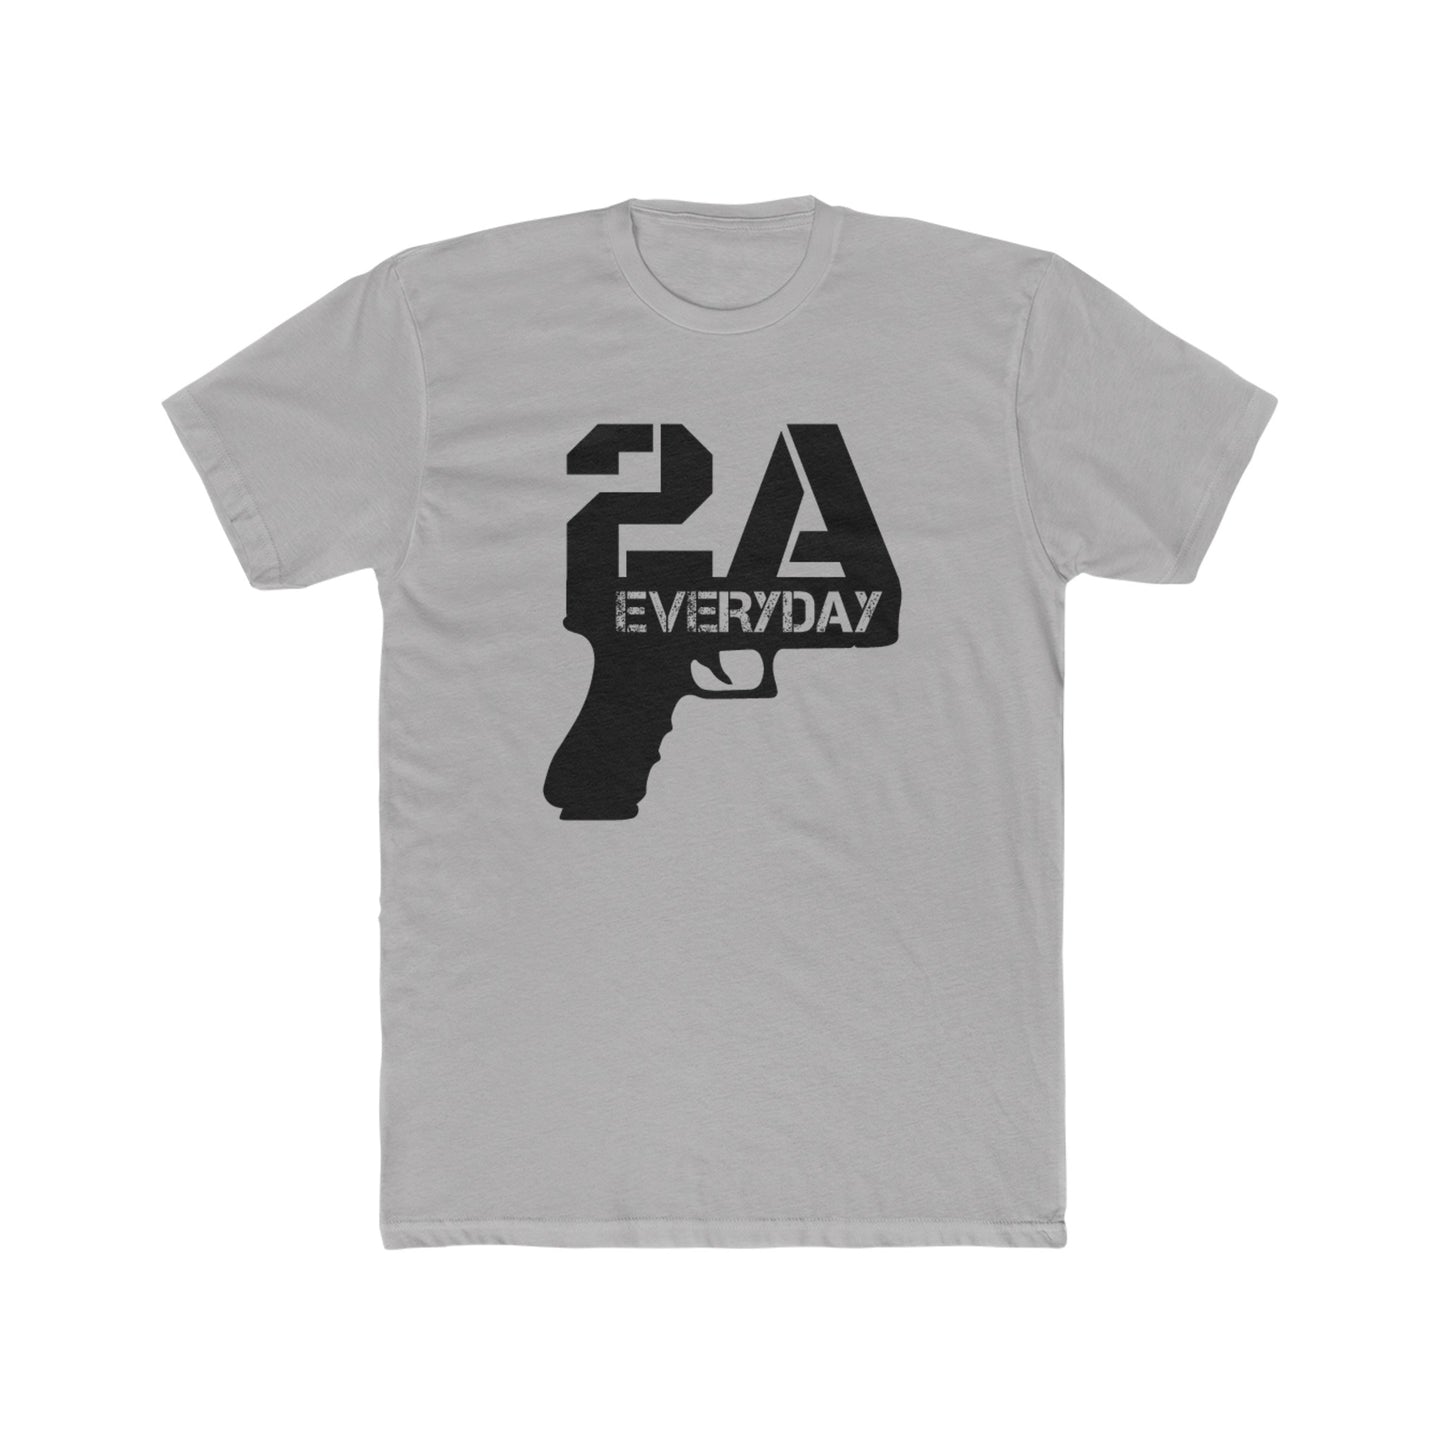 2A Everyday Blended Tee